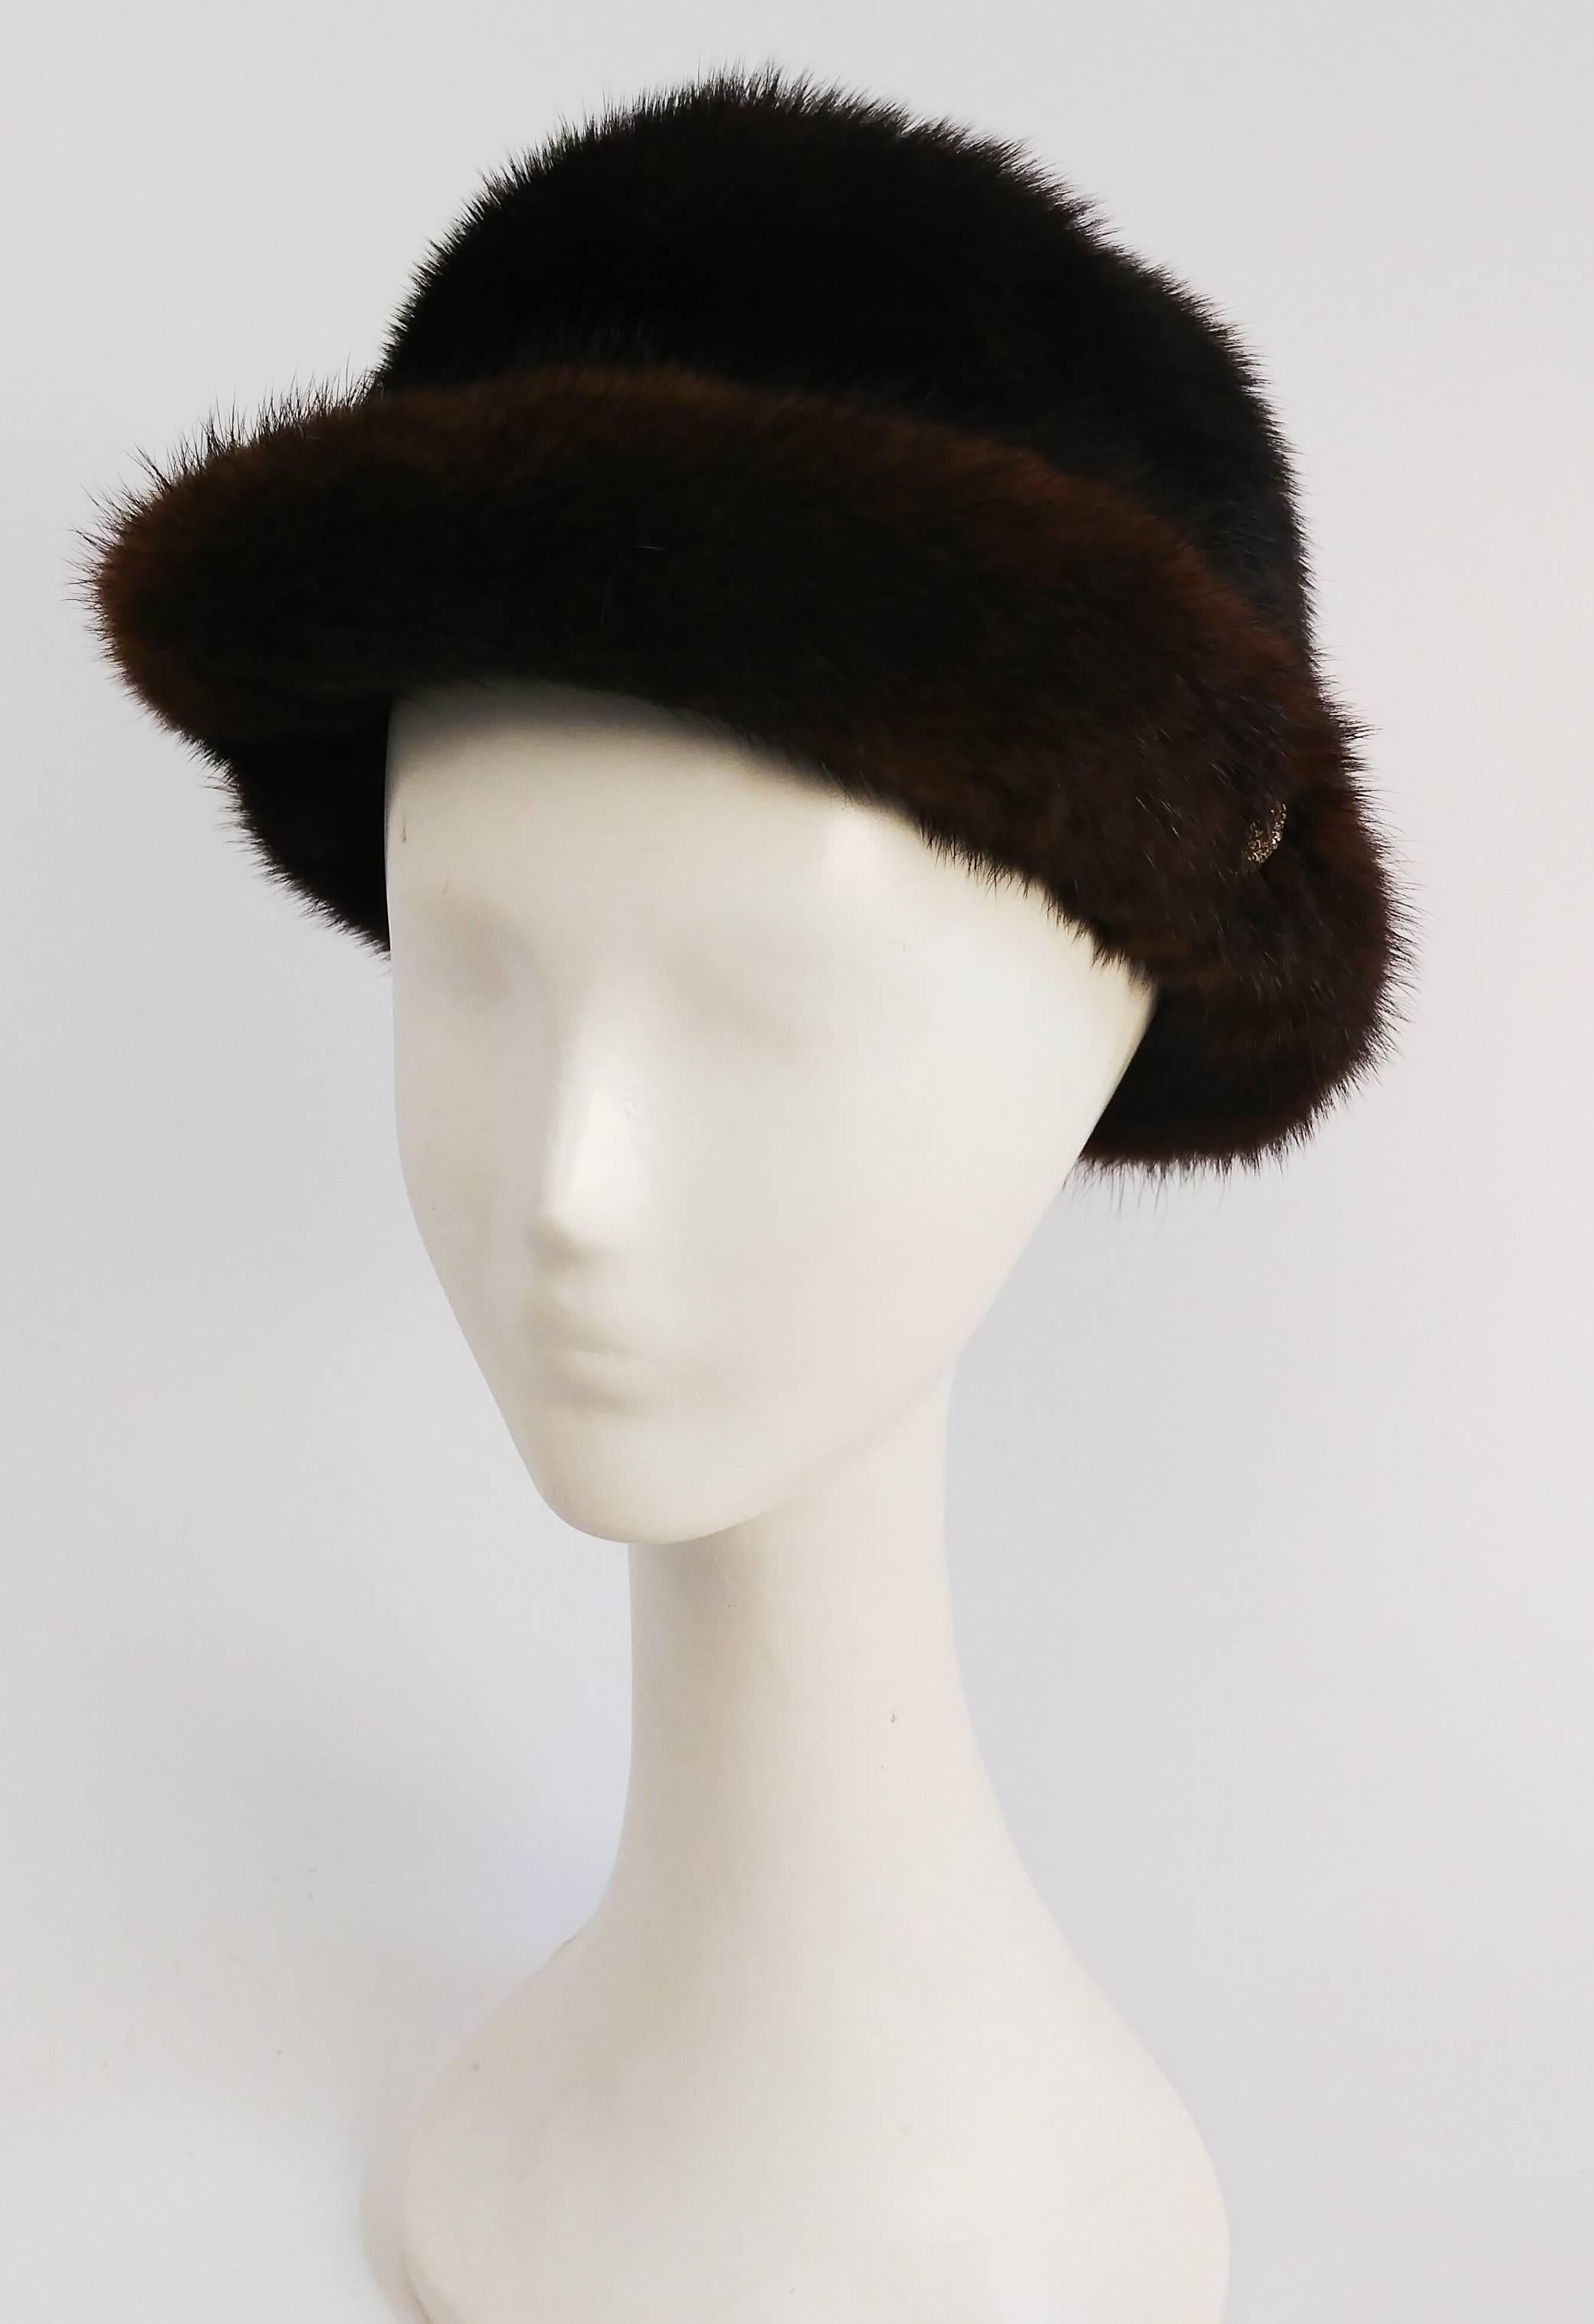 1960s Chocolate Brown Mink Hat. Decorative button sewn on each side to keep brim flipped up.